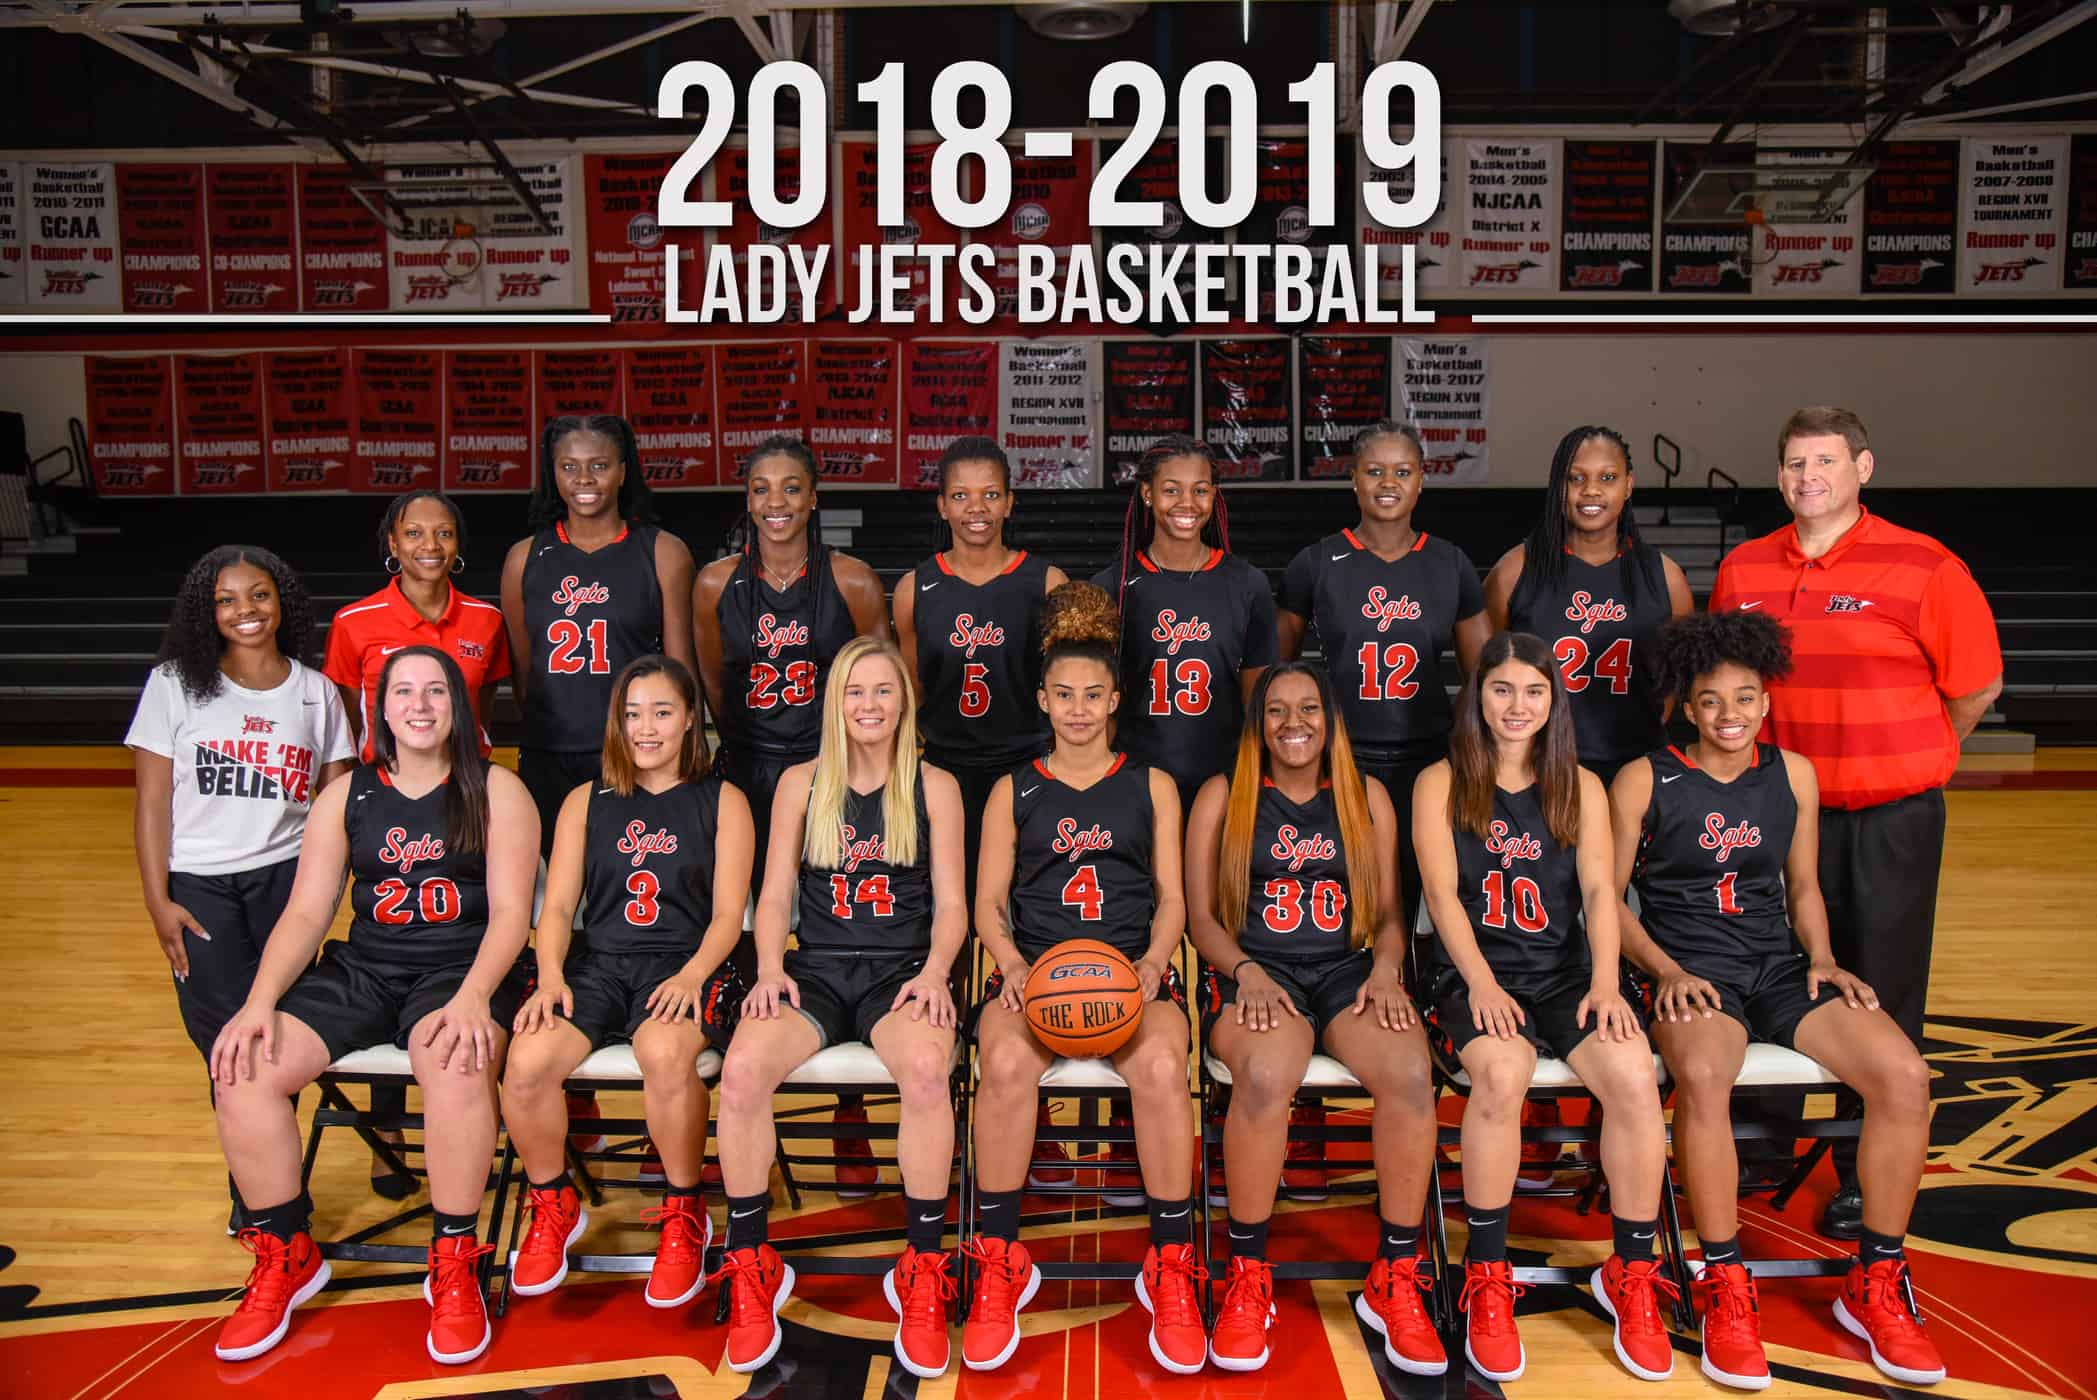 2018 – 2019 Lady Jets – Shown seated (l to r) are: Aubrey Maulden (20); Rio Yamazaki (3); Anna McKendree (14) Alyssa Nieves (4); Kamya Hollingshed (30); Mari Hill (10); and Ricka Jackson (1). Standing are: Manager Destiny Penn, Assistant coach Kezia Conyers, Bigue Sarr (21); Oumy Gueye (23); Amara Edeh (5) Yasriyyah Wazeerud-Din (13); Fatou Pouye (12); Laky Somo (24); and SGTC Athletic Director and Lady Jets head coach James Frey.